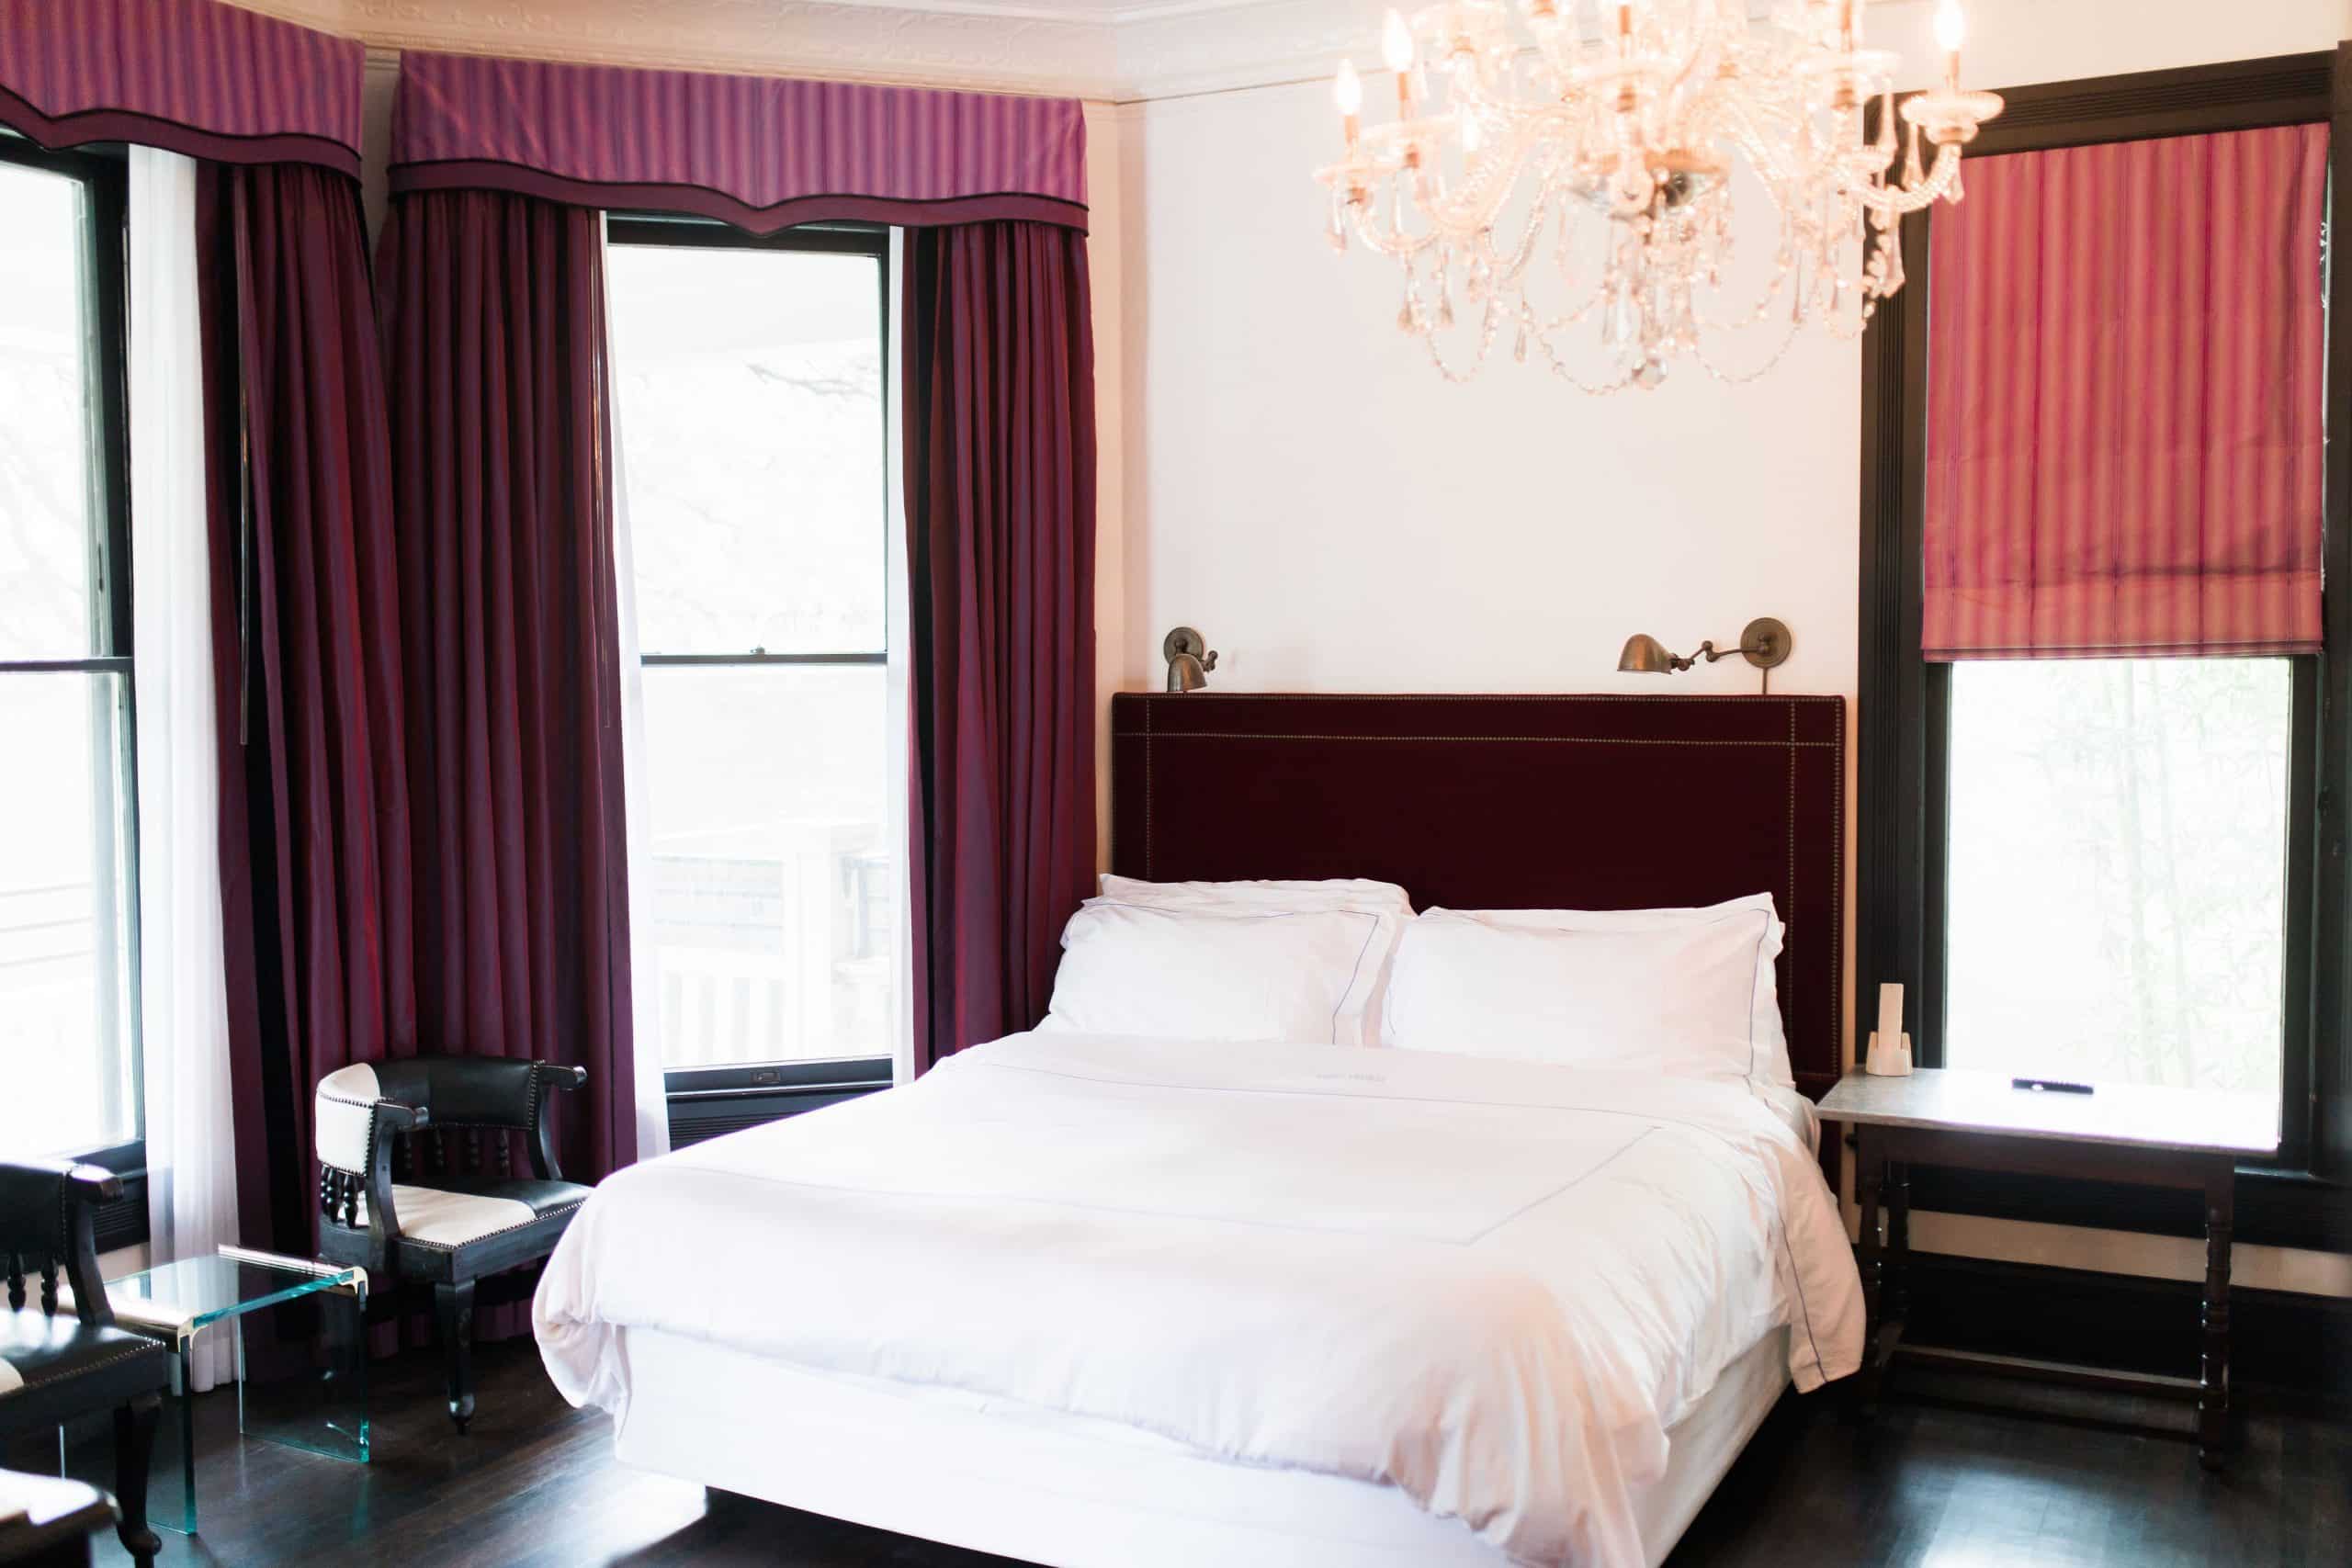 Looking for the coolest hotel in Austin? Look no further than the Hotel Saint Cecilia, a luxury boutique hotel by Bunkhouse.